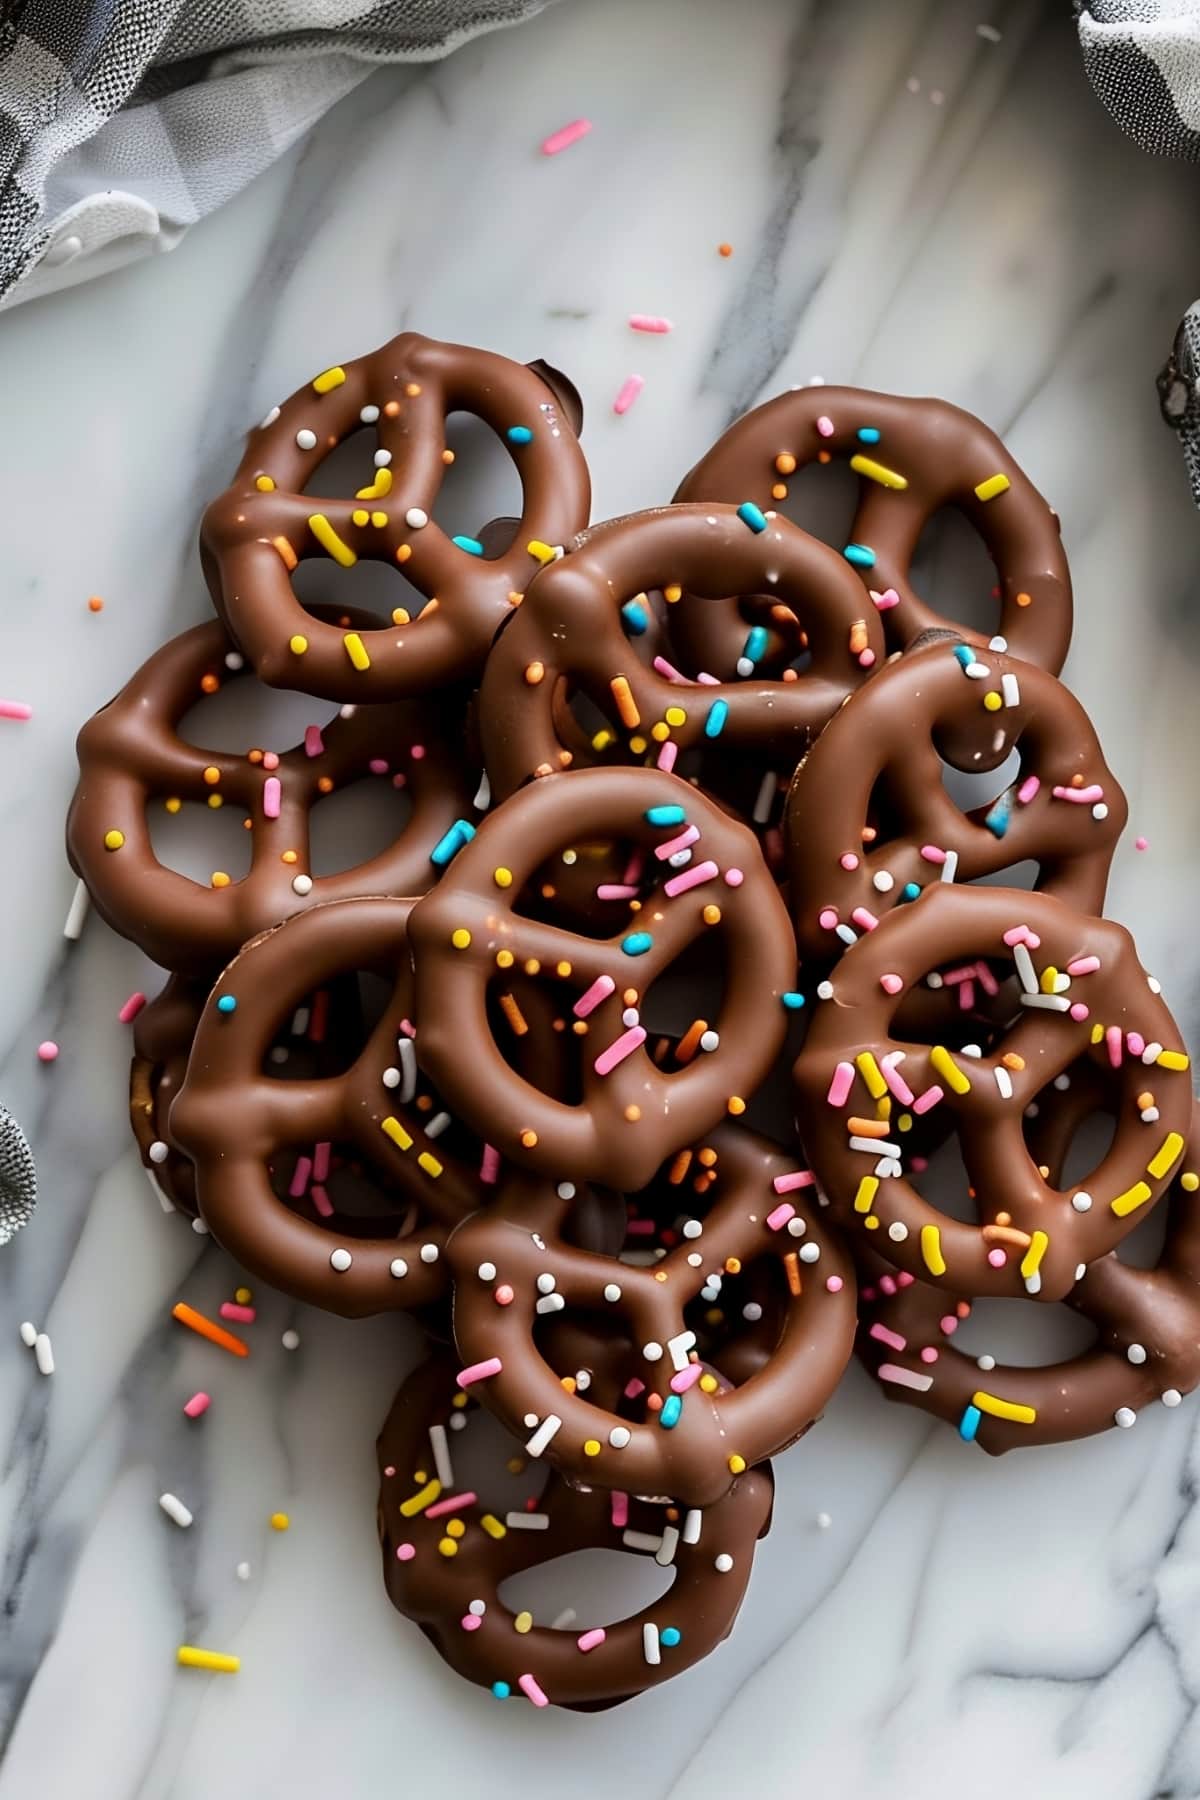 Sweet homemade chocolate covered pretzels with sprinkled candies sitting on a white marble table